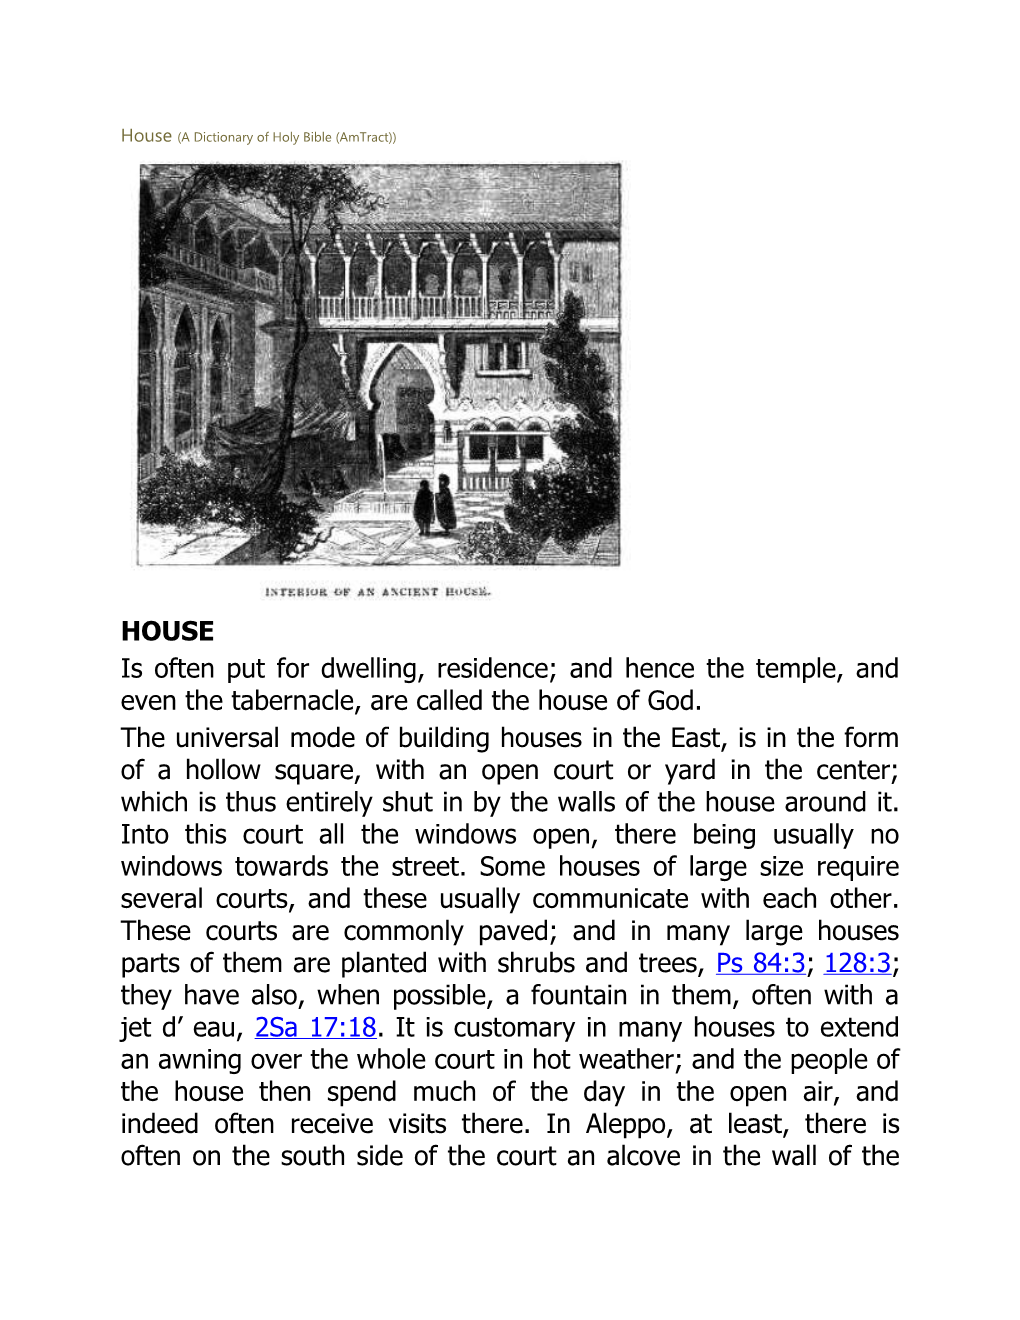 House (A Dictionary of Holy Bible (Amtract))